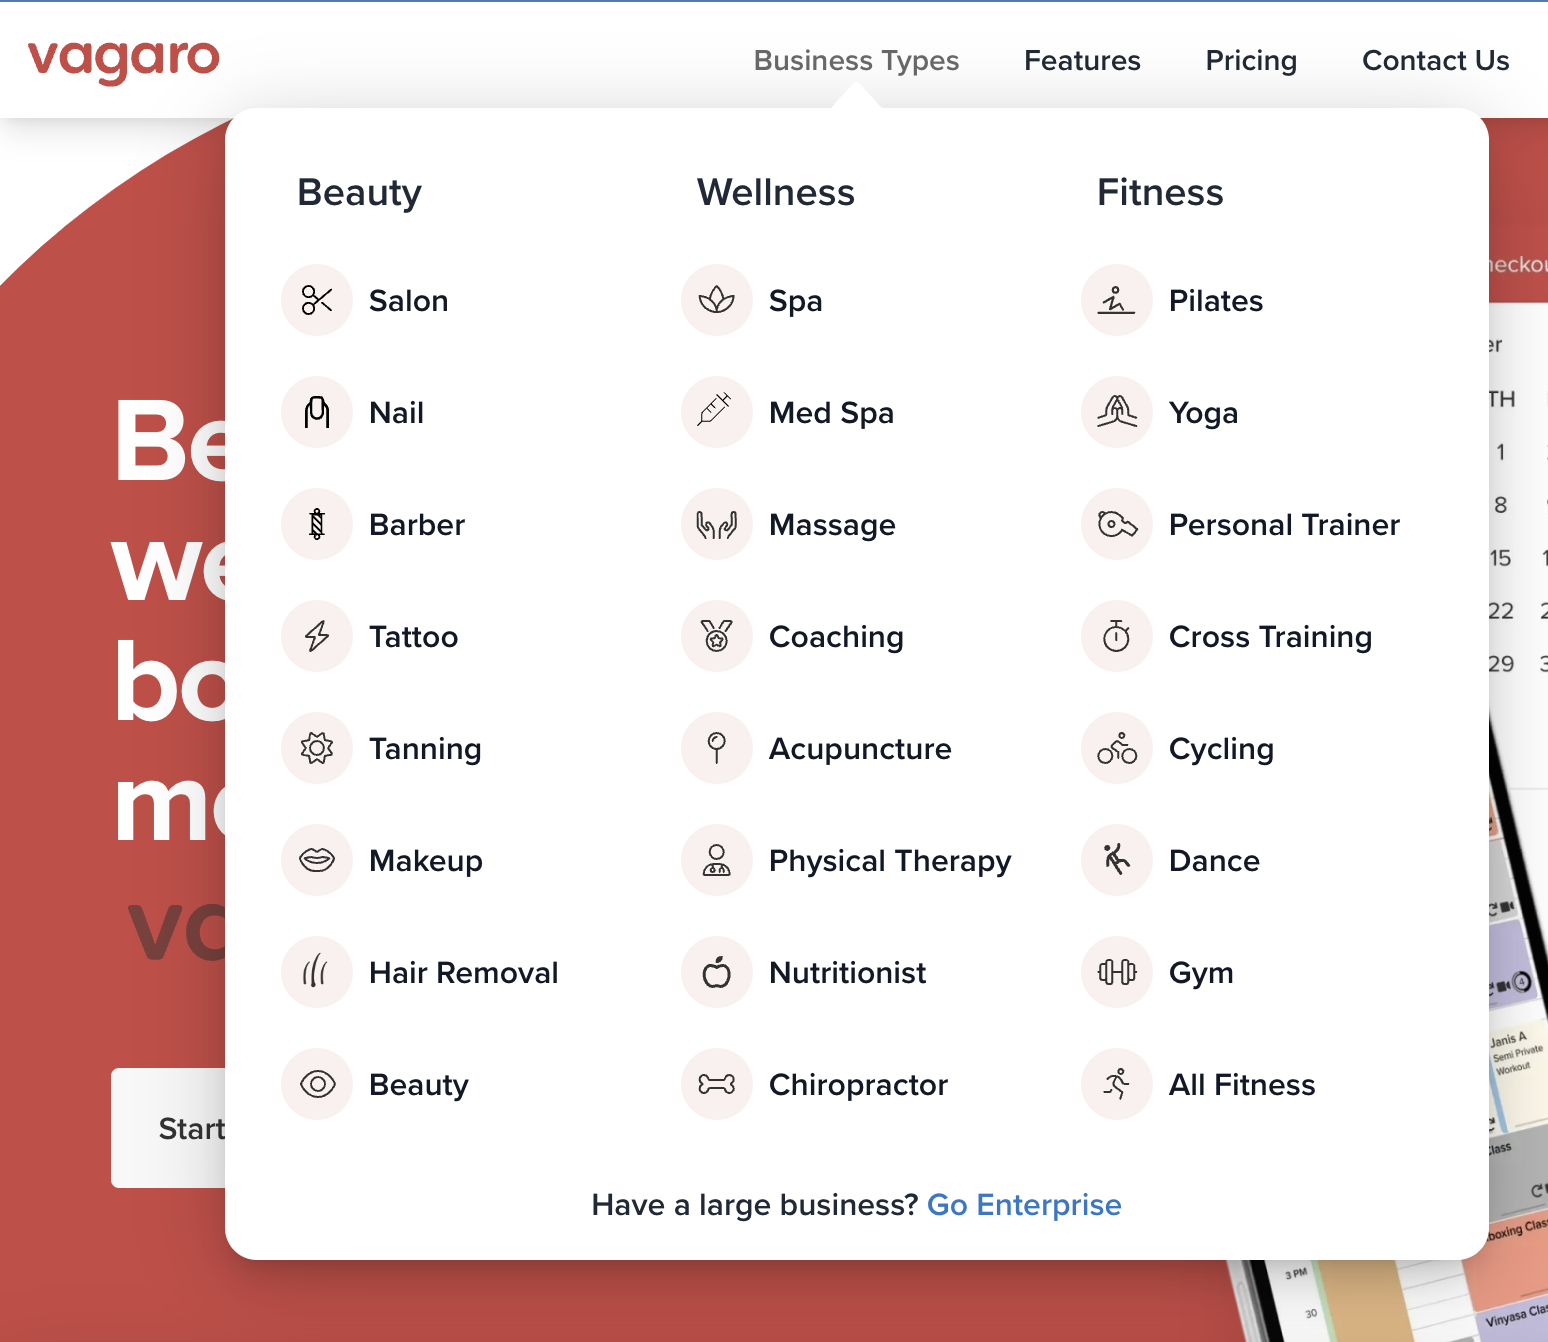 List of businesses who benefit from Vagaro